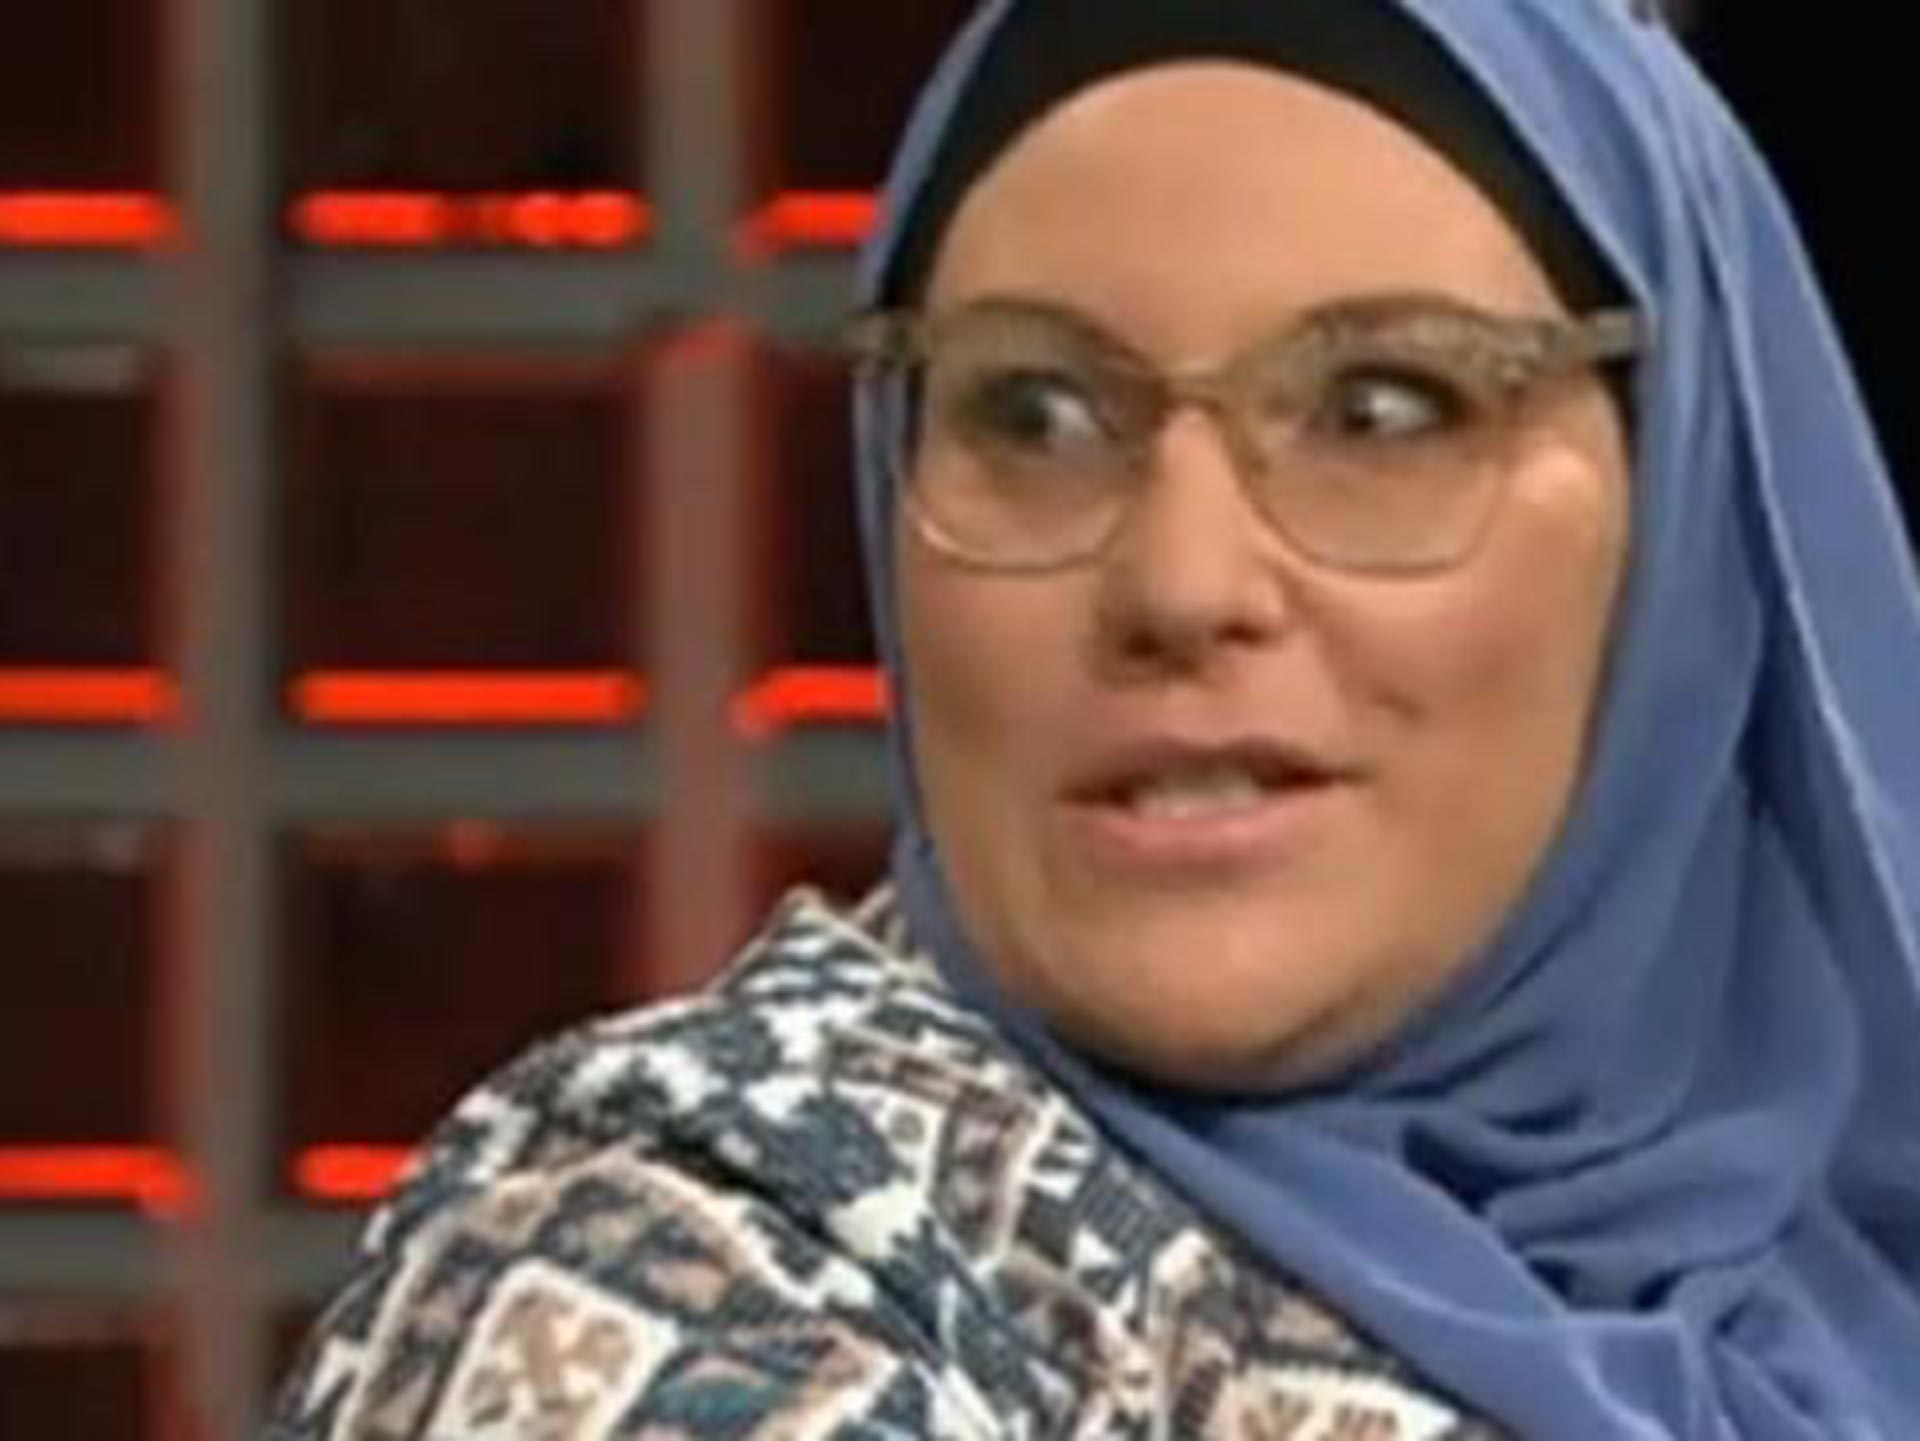 Muslim community advocate Lydia Shelly on The Hack